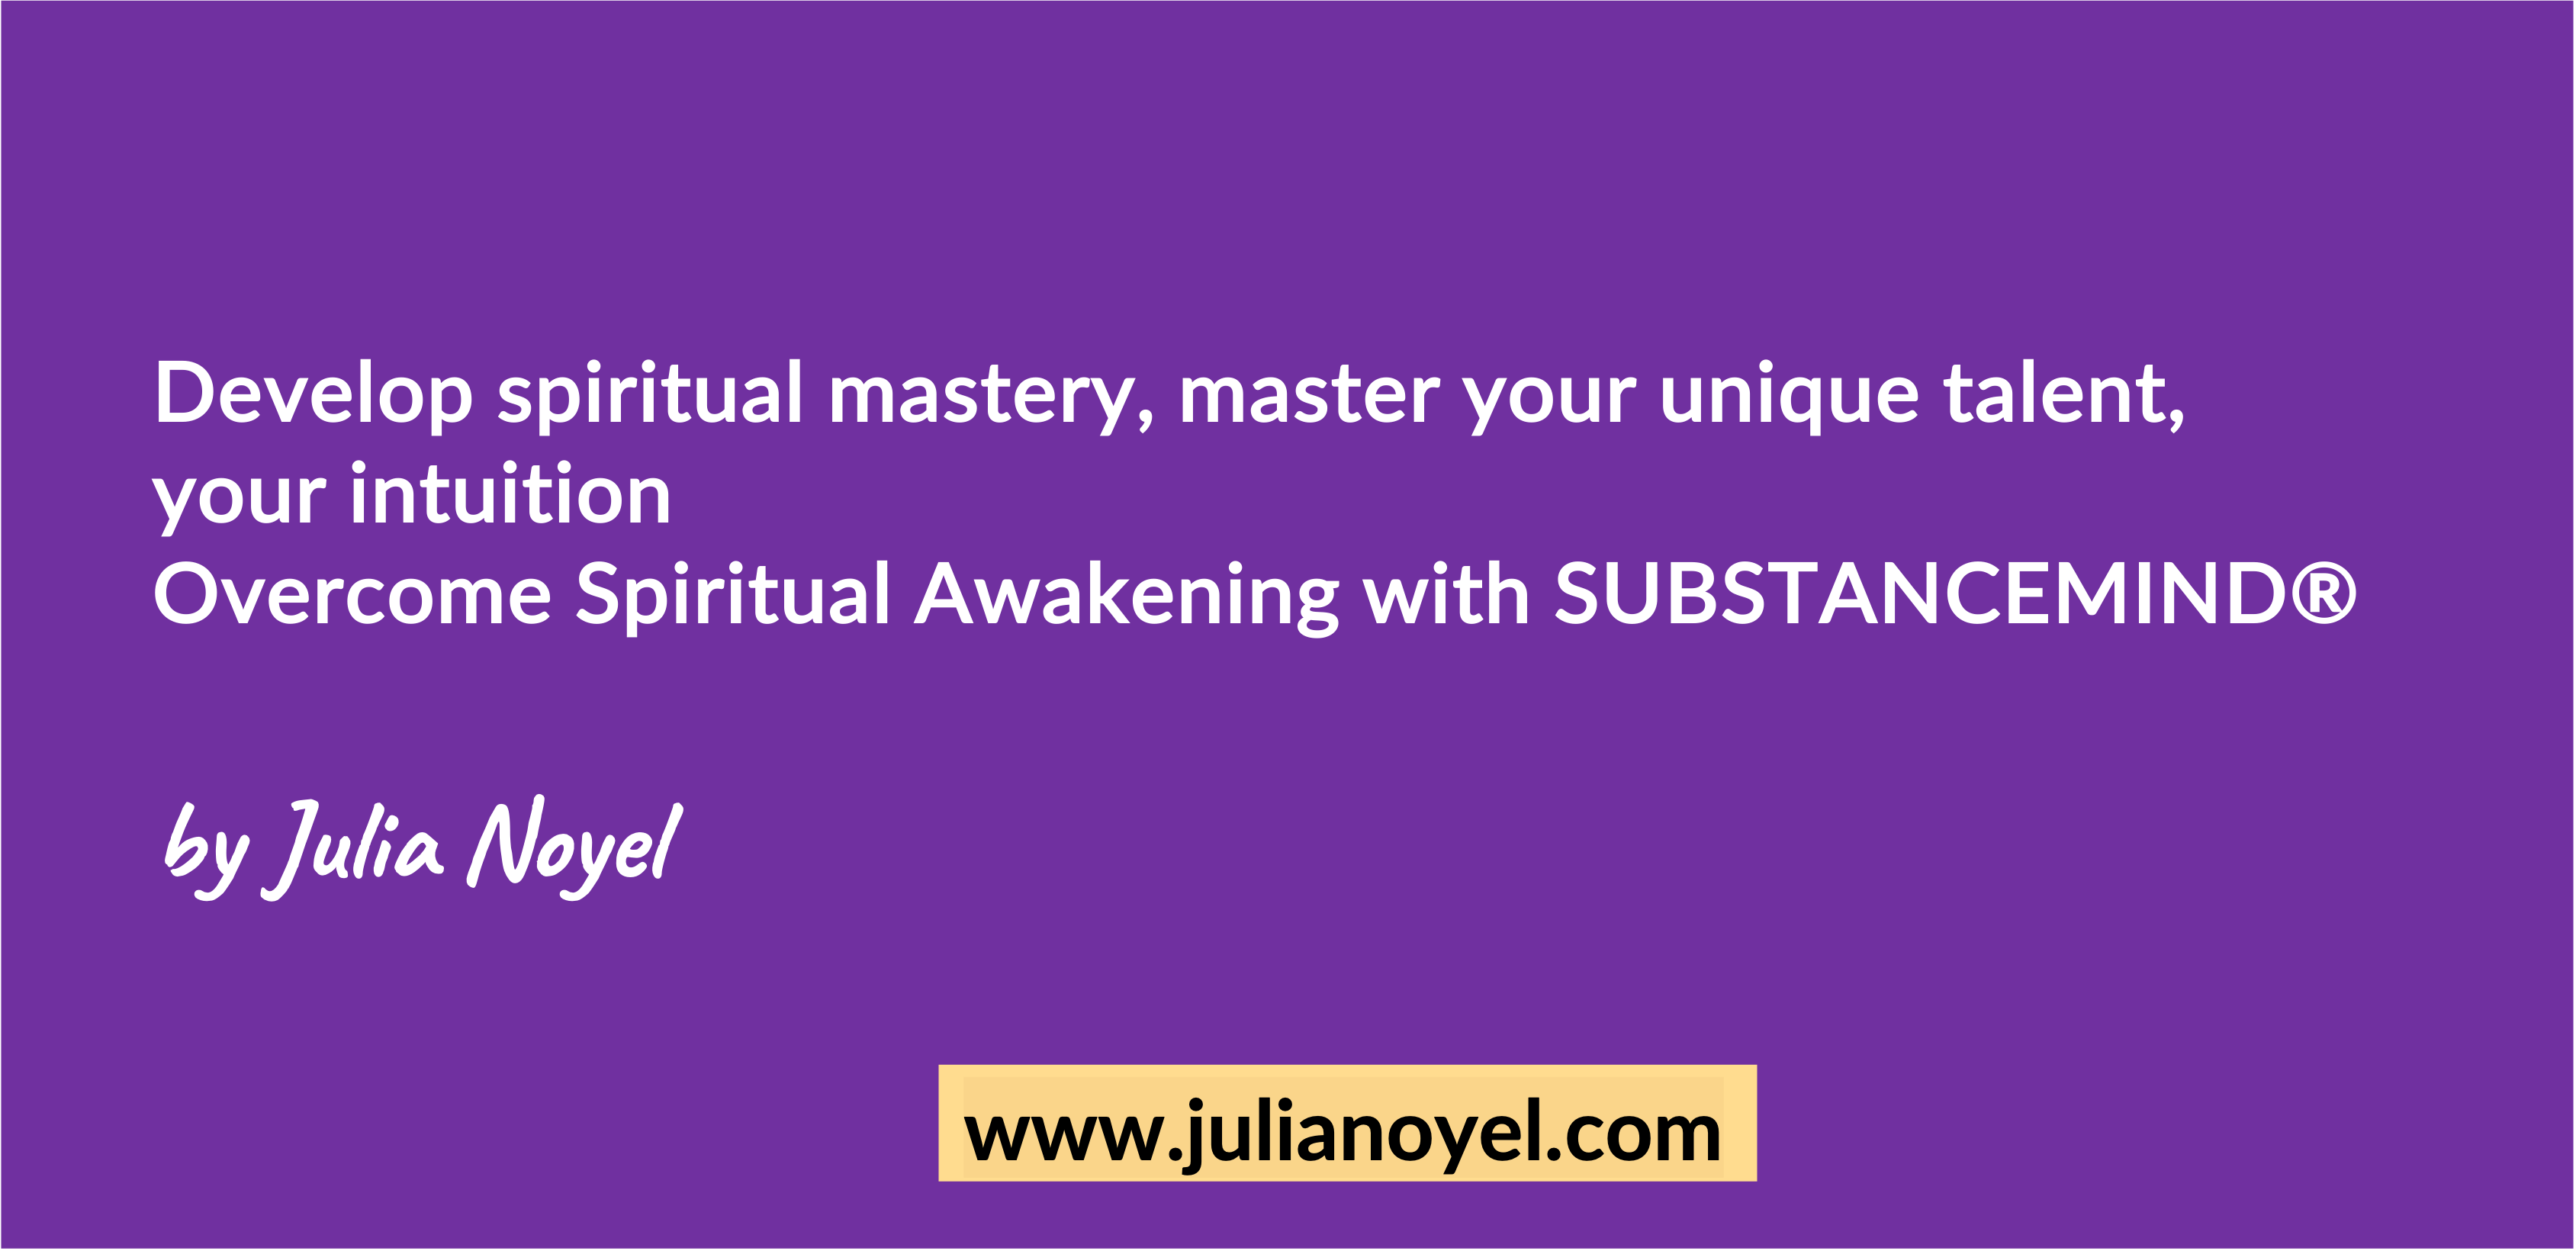 Develop spiritual mastery, master your unique talent, your intuition Overcome Spiritual Awakening with SUBSTANCEMIND® by Julia Noyel